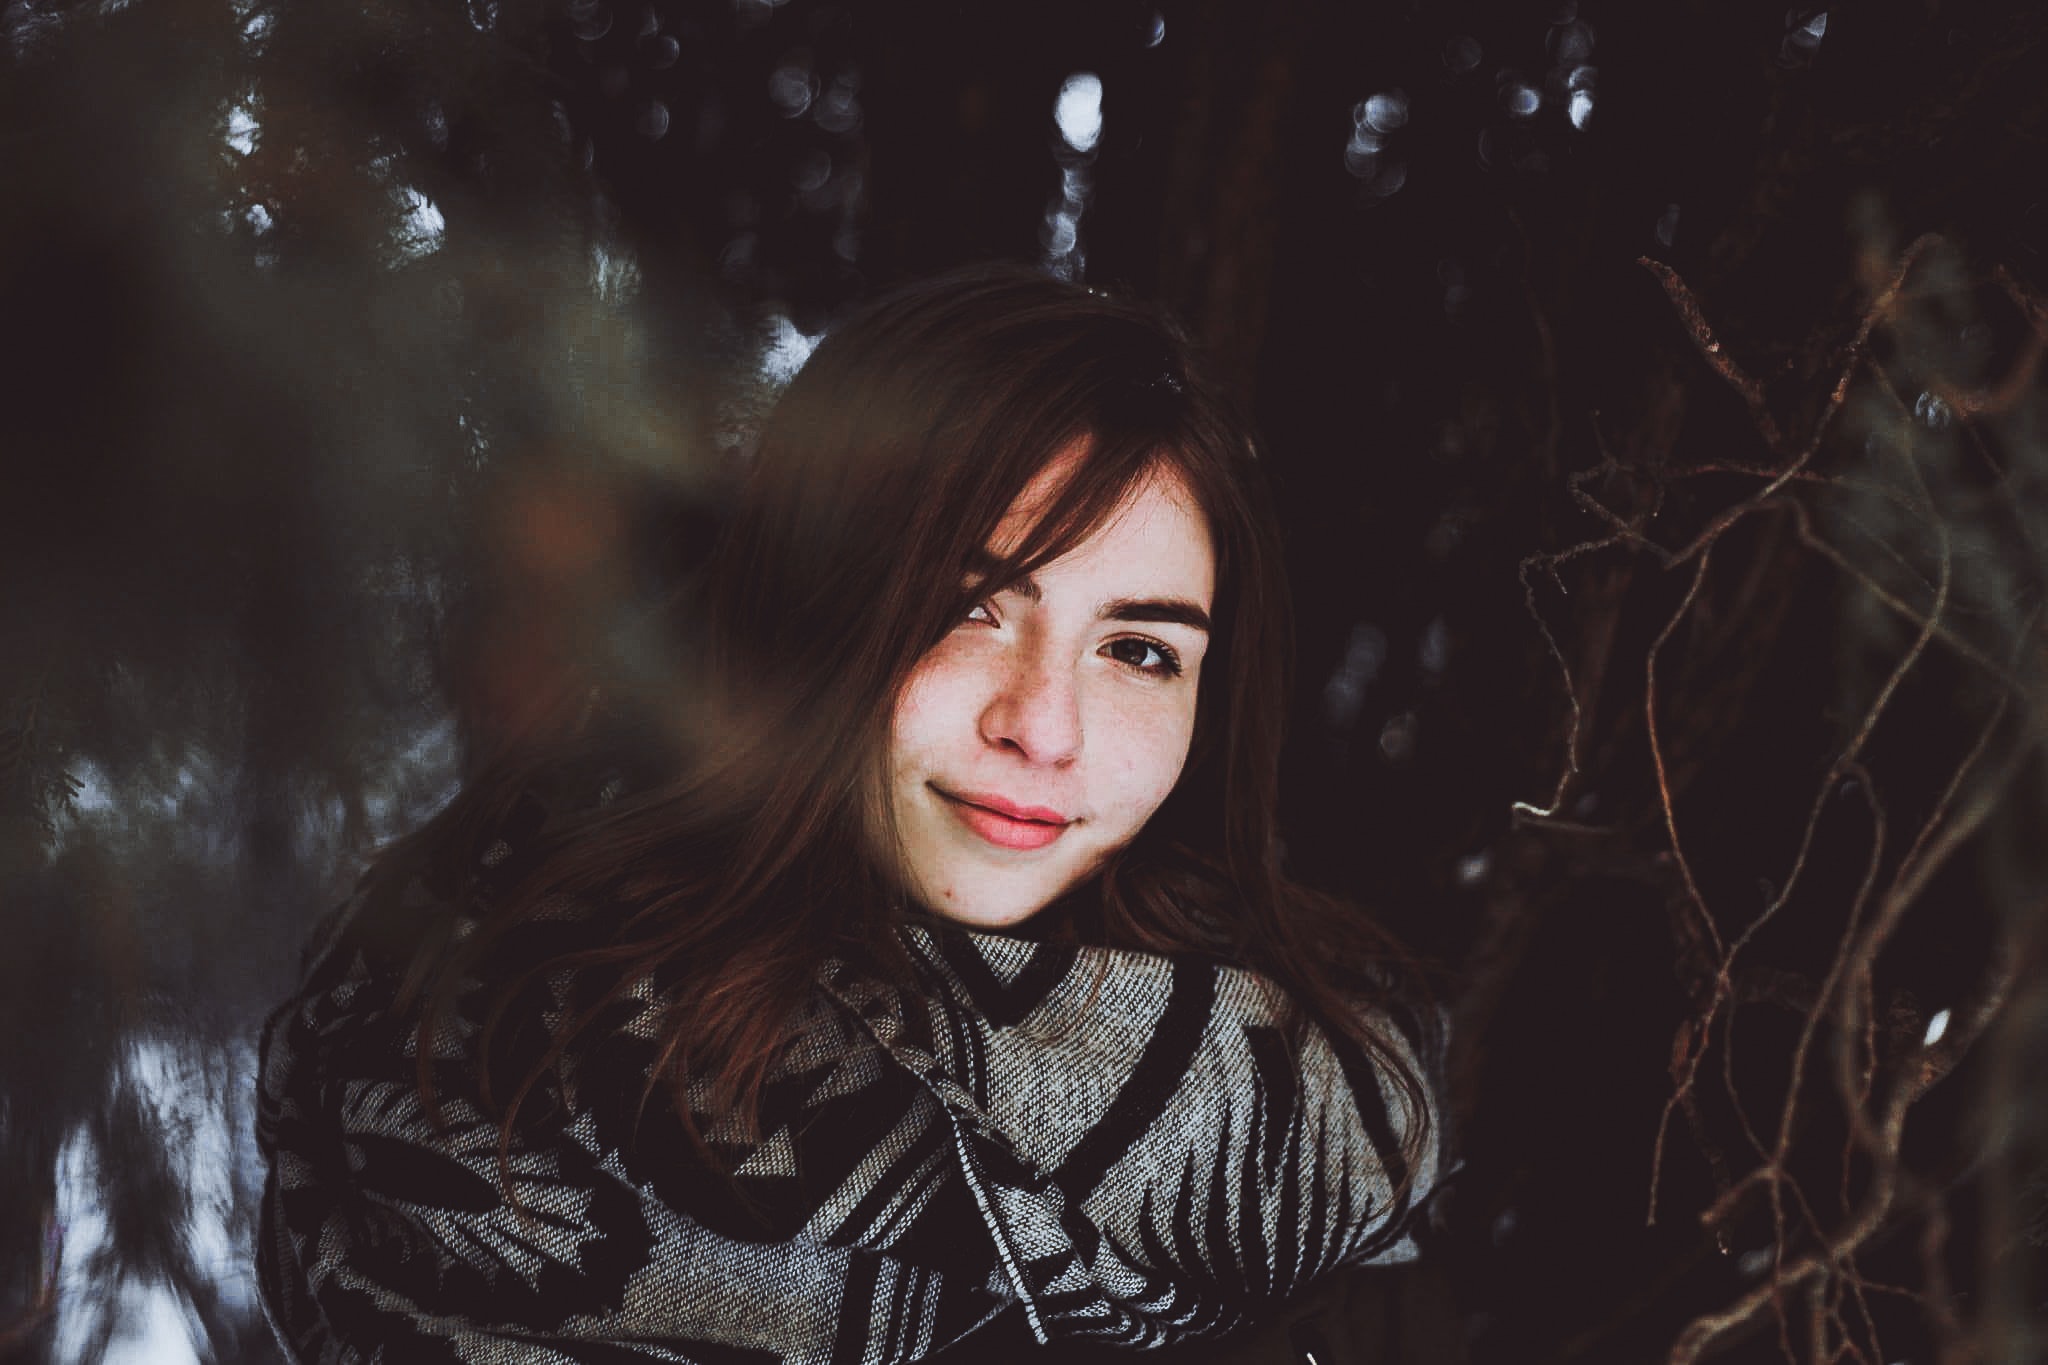 Woman in Black and Gray Sweater Posing Smile for Photo, Art, Model, Woman, Winter, HQ Photo